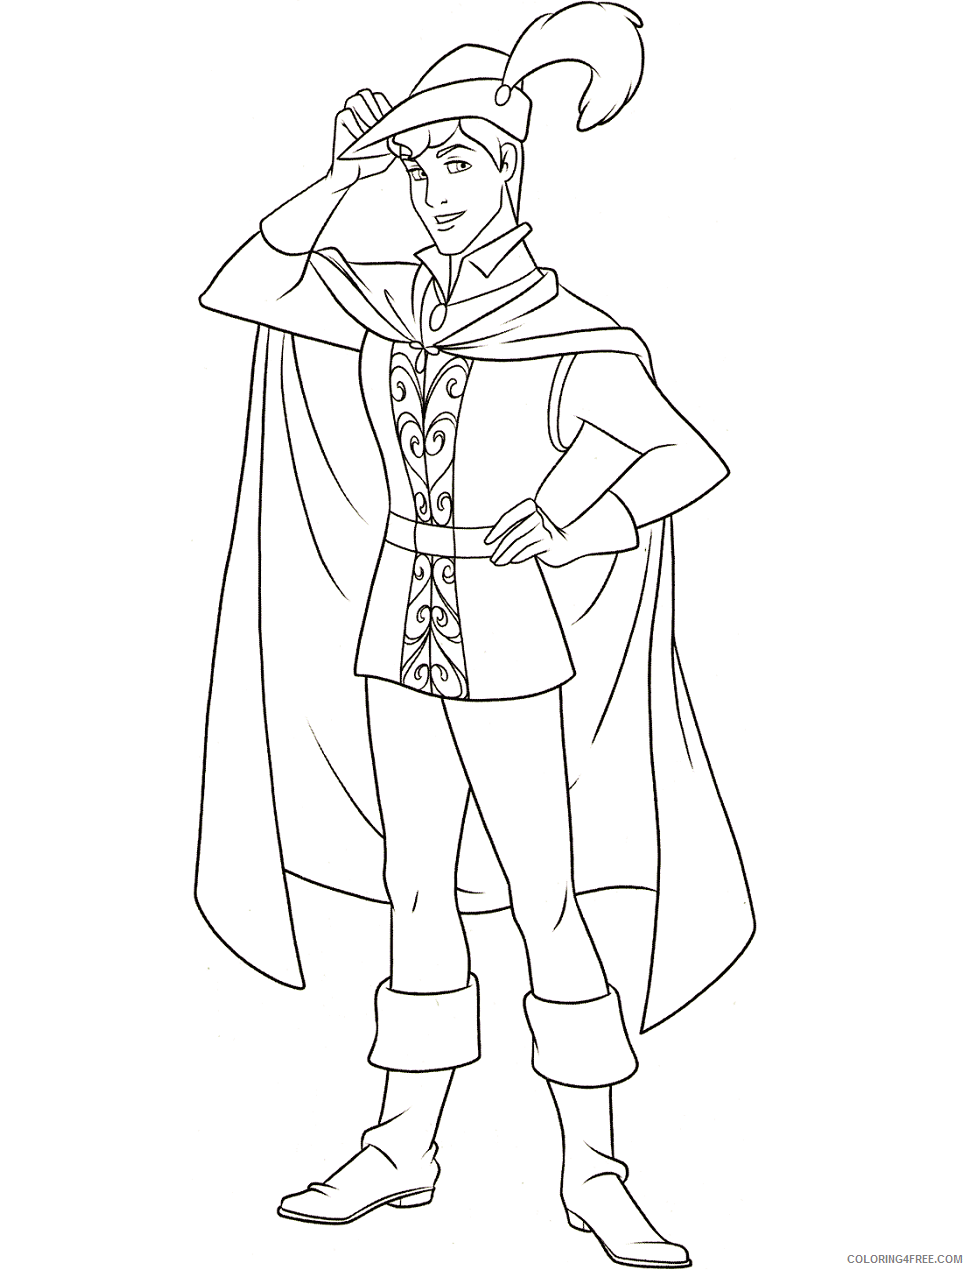 Prince Phillip Coloring Pages Cartoons 1567496506_prince_phillip a4 Printable 2020 5072 Coloring4free